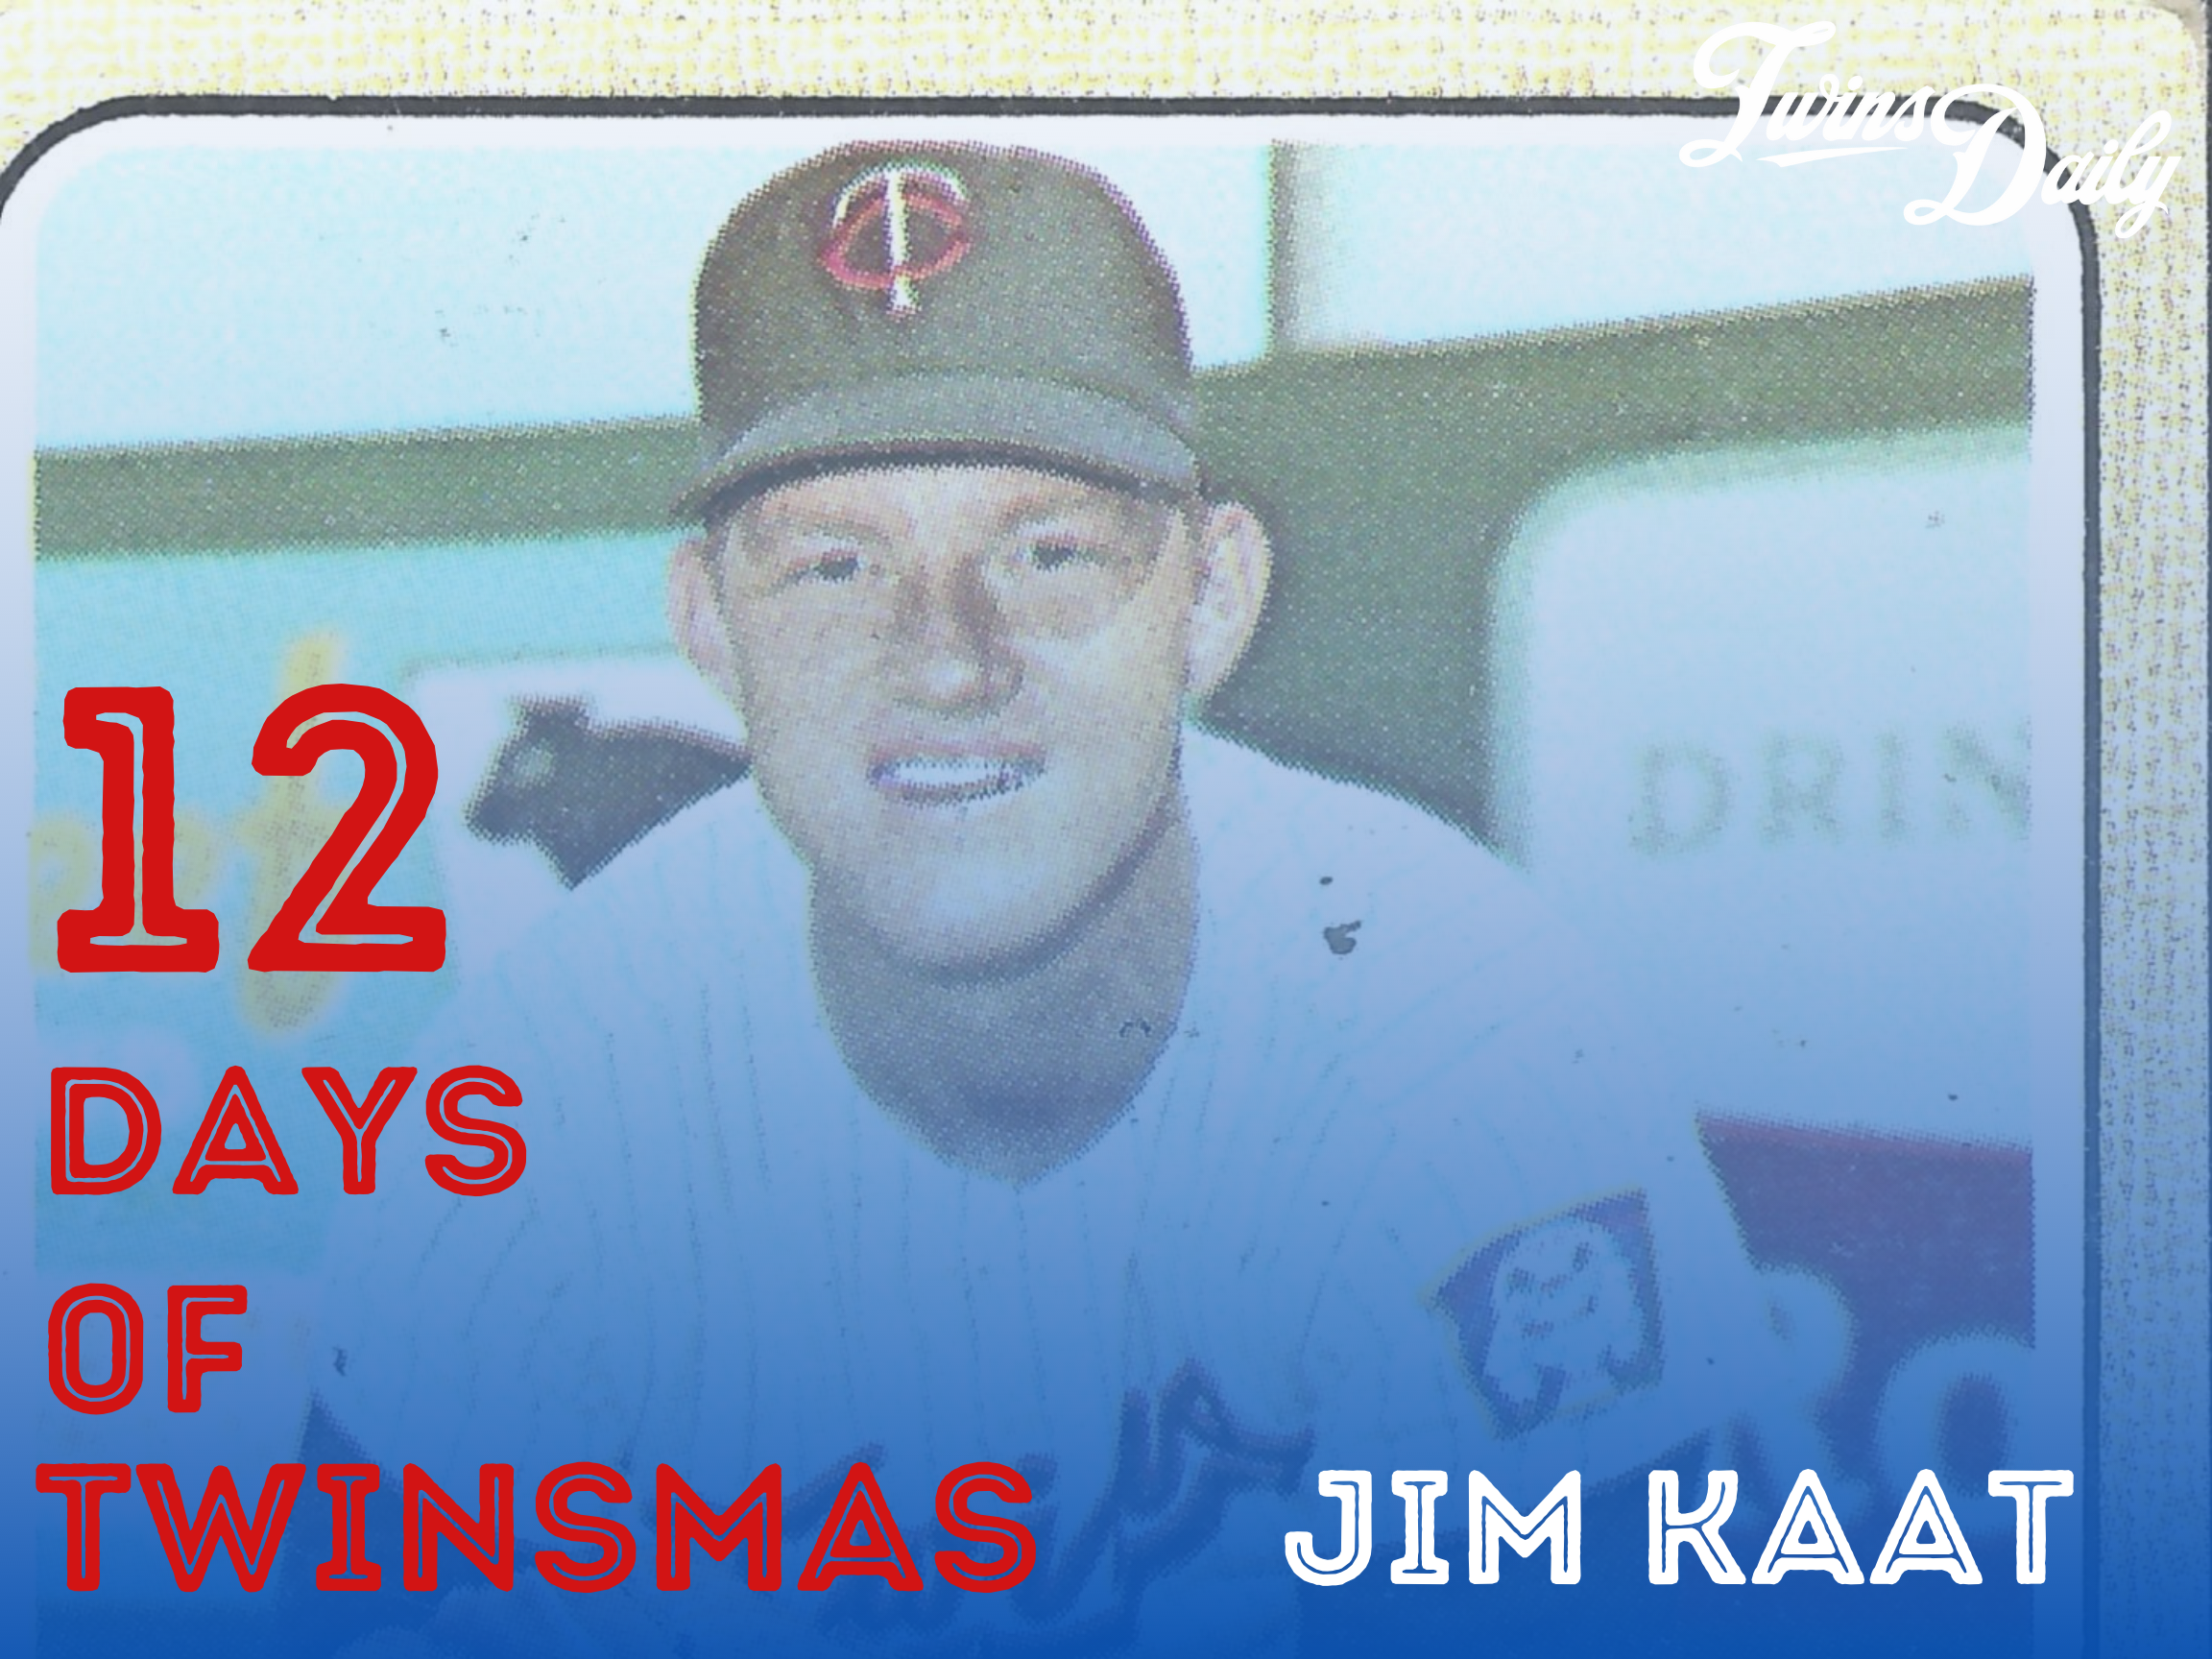 12 Days of Twinsmas: #11 Chuck Knoblauch - Twins Daily - Twins Daily